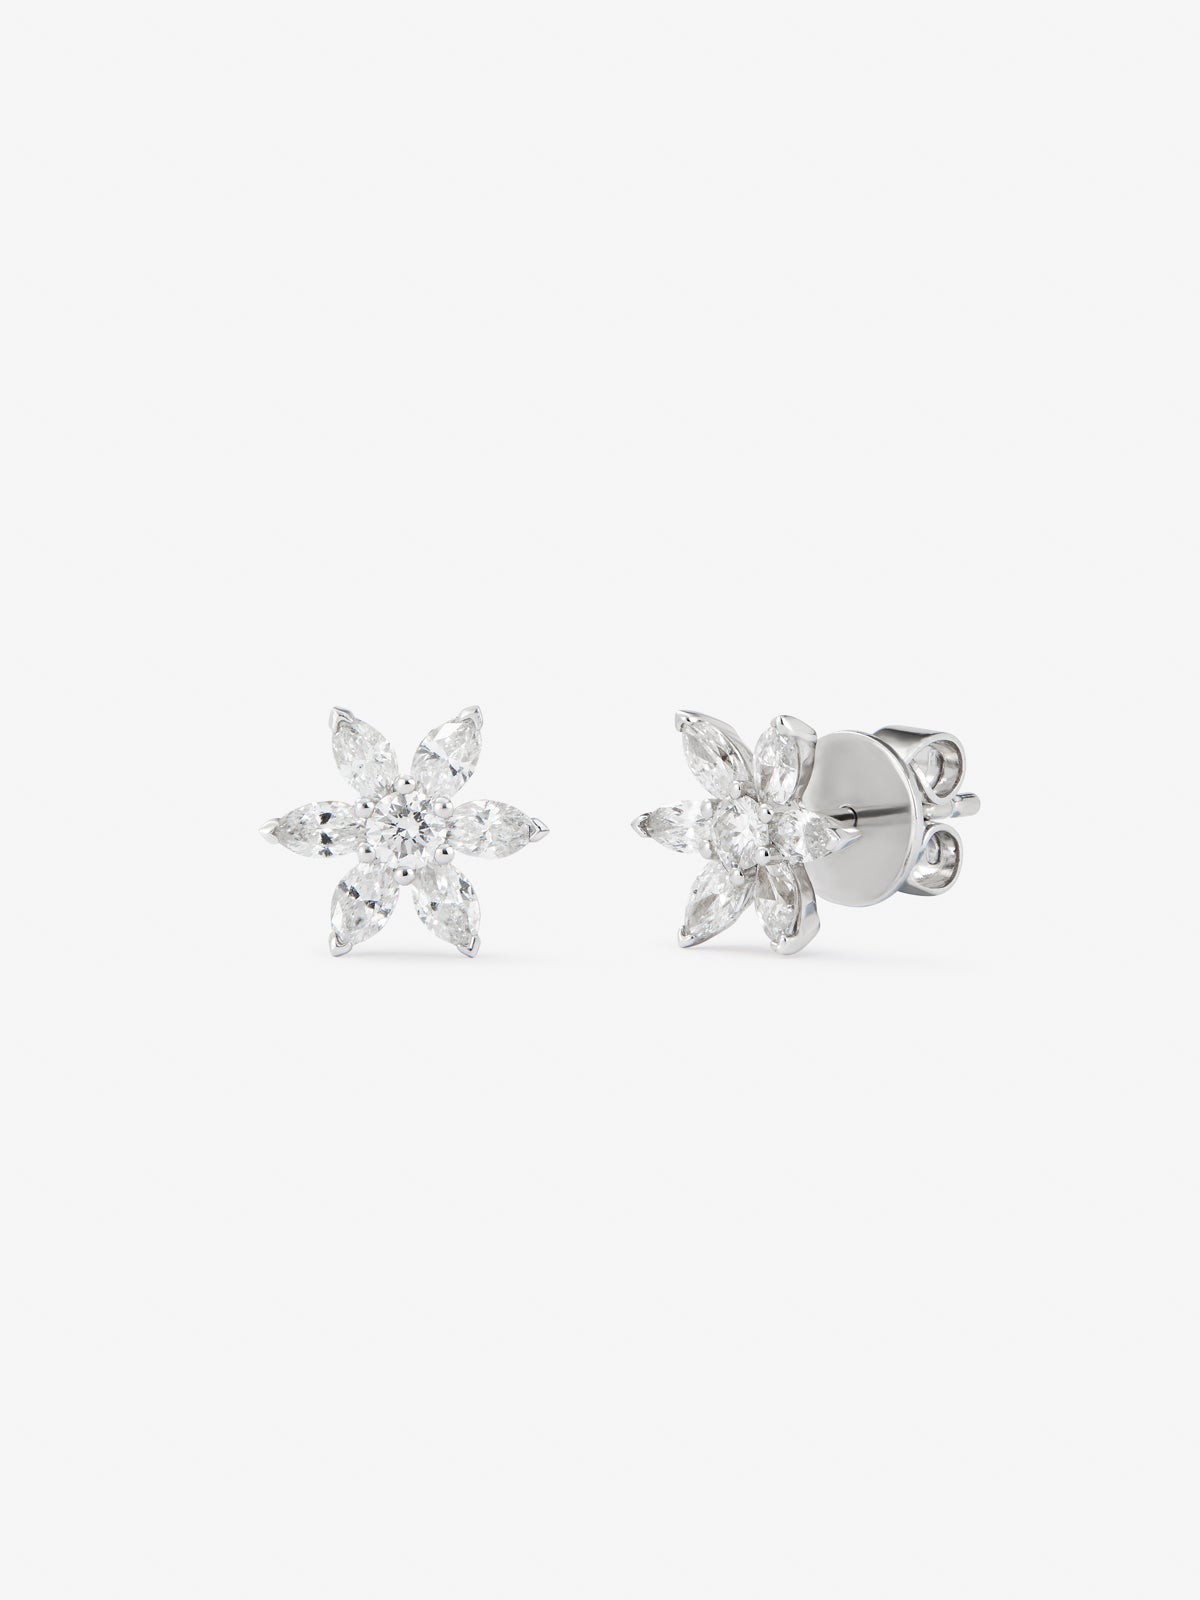 18K white gold earrings with 2 brilliant-cut diamonds with a total of 0.12 cts and 12 marquise-cut diamonds with a total of 0.59 cts